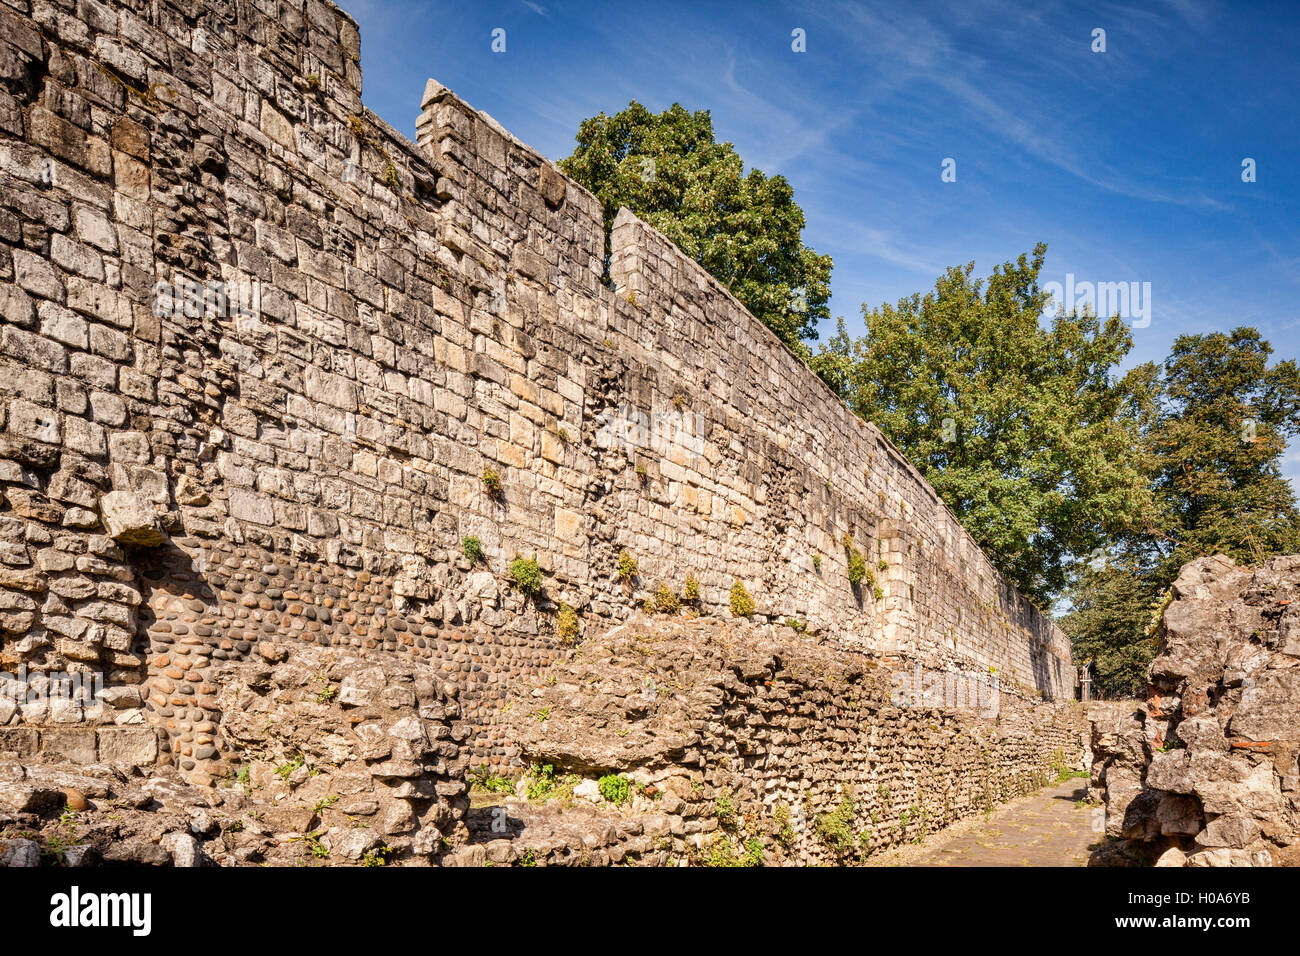 The oldest section of York city walls, built around 200 AD, during the Roman occupation, York, North Yorkshire, England, UK Stock Photo